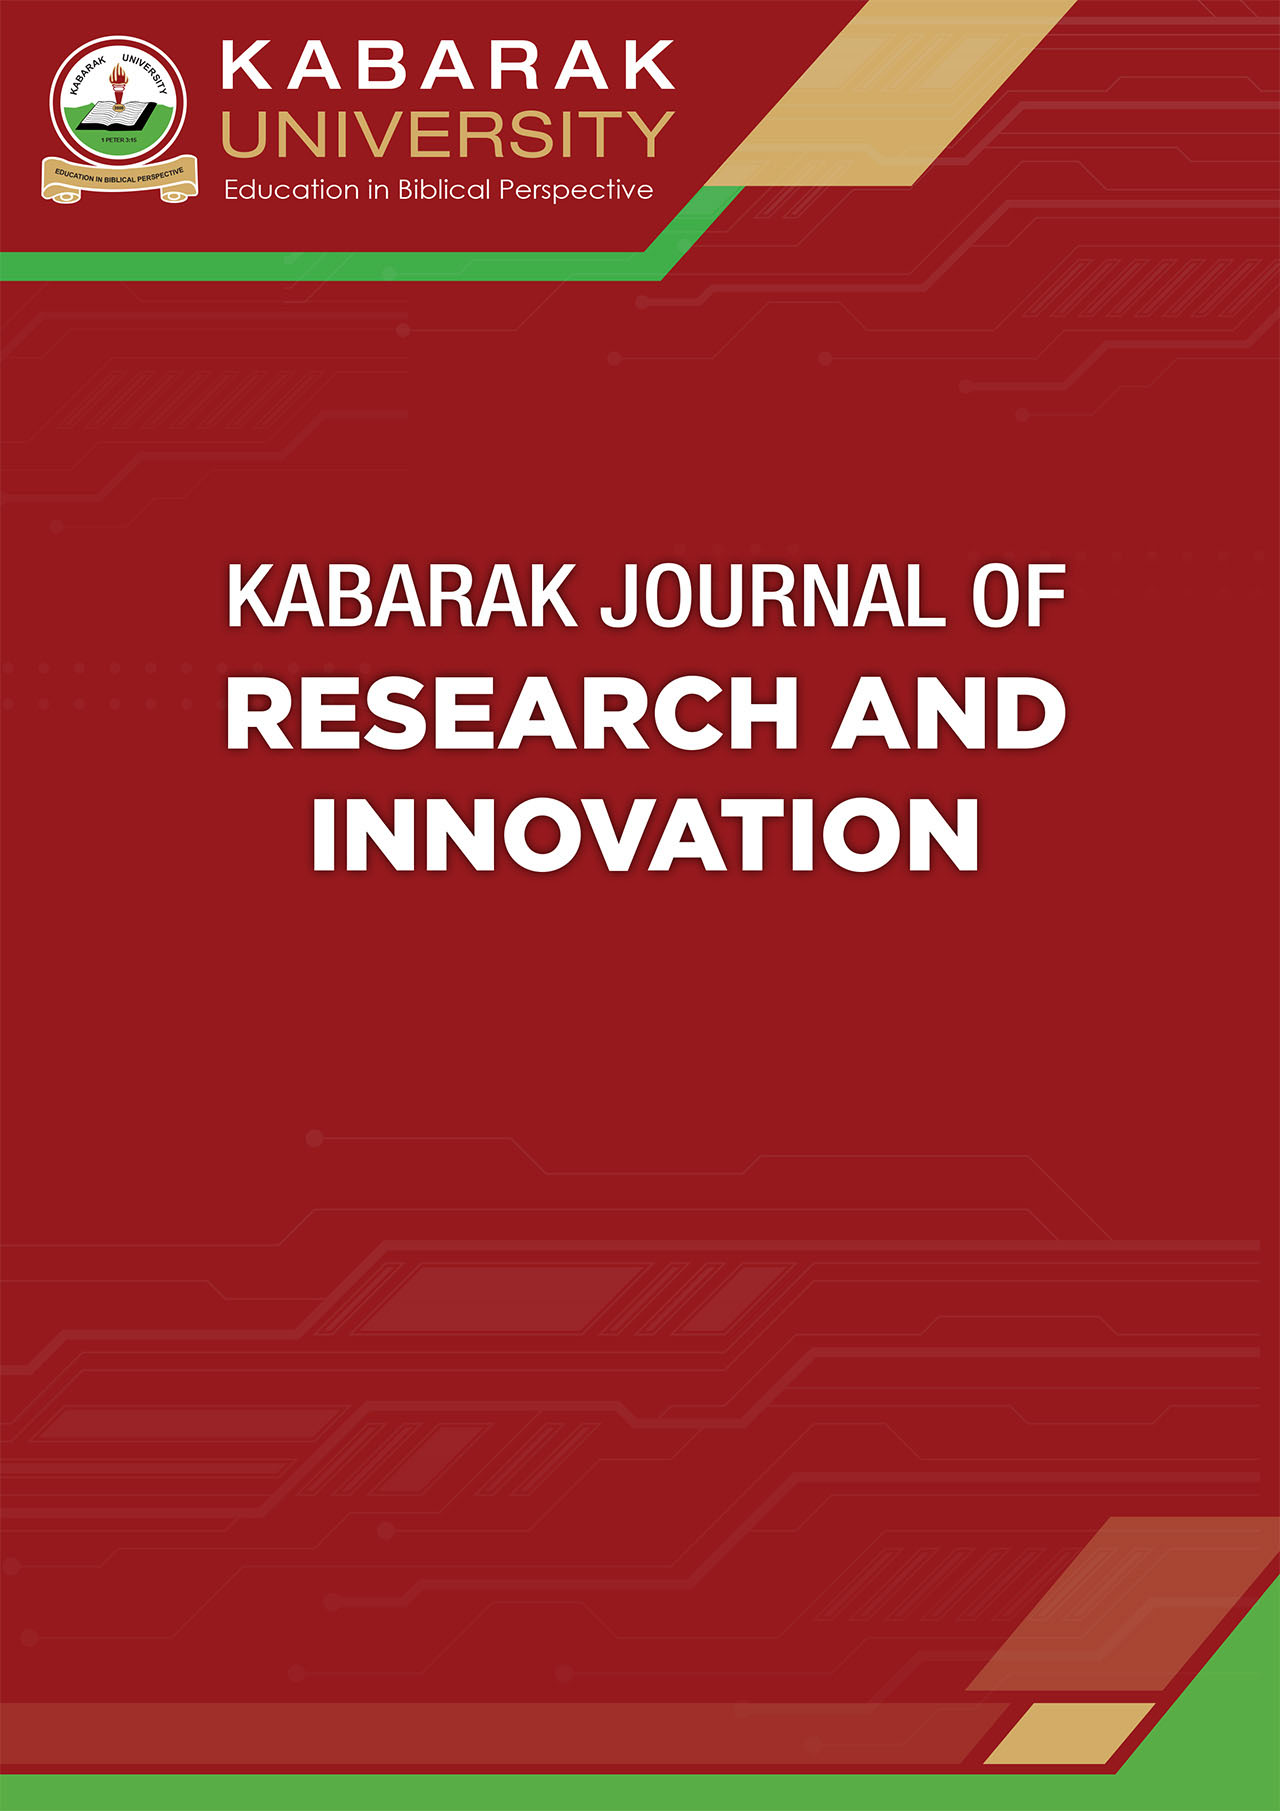 					View Vol. 10 No. 2 (2020): Kabarak Journal of Research and Innovation (KJRI)
				